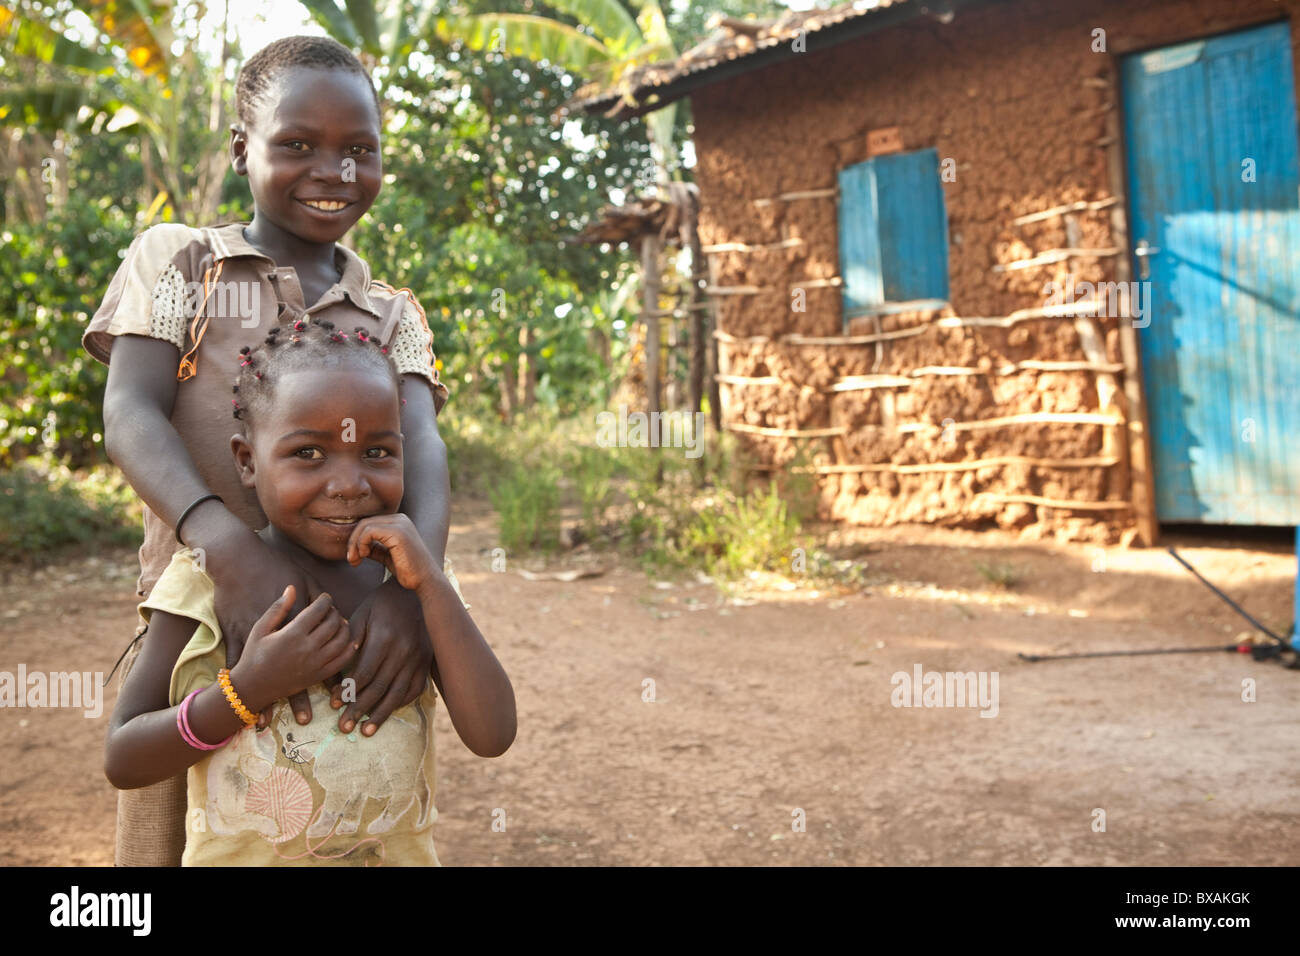 A brother and sister pose together in Buwanyanga Village - Sironko, Eastern Uganda, East Africa. Stock Photo